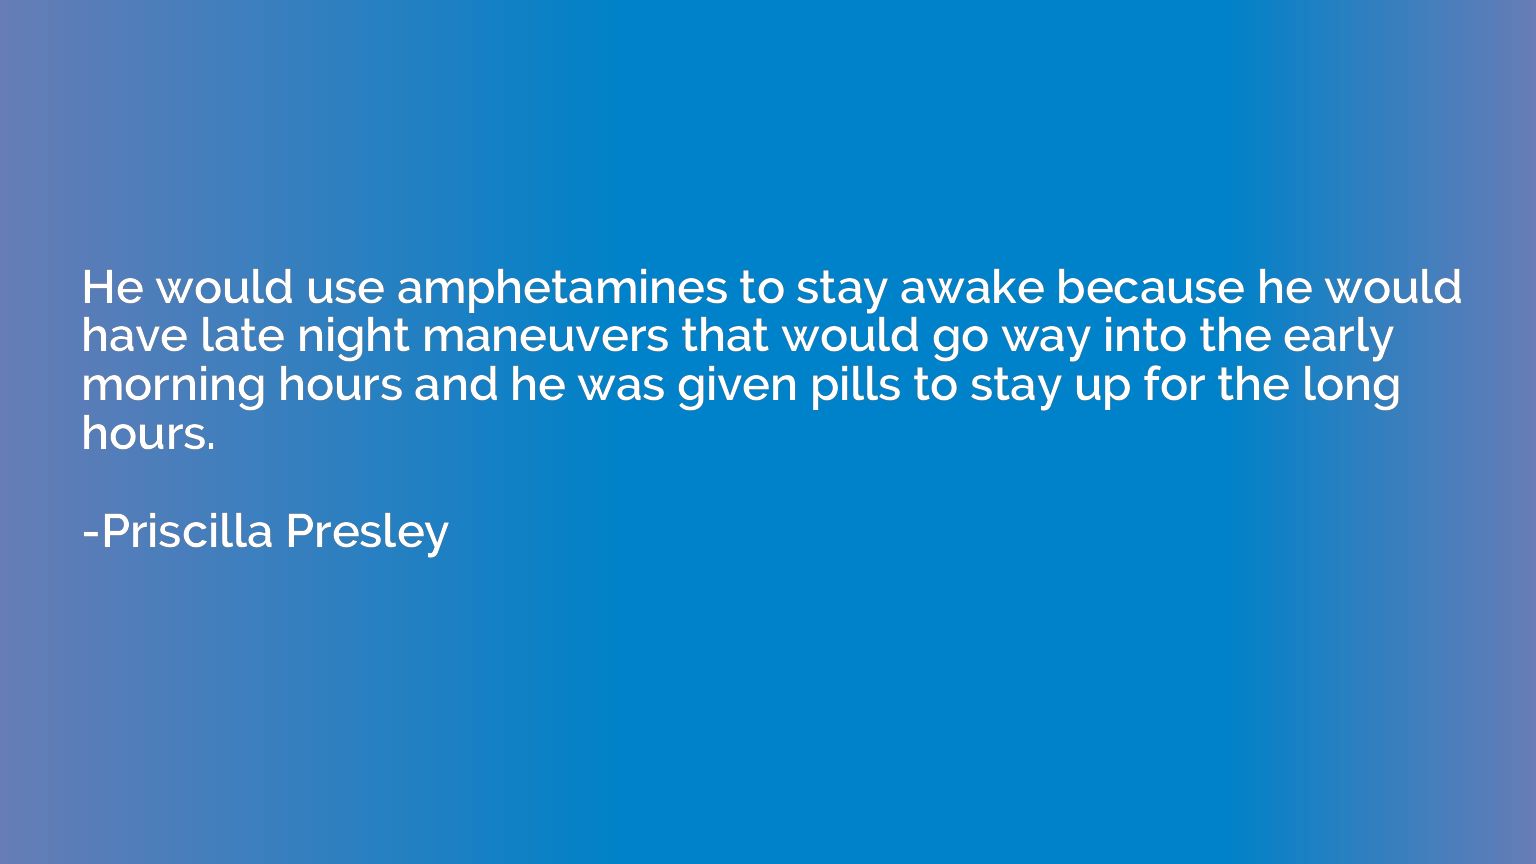 He would use amphetamines to stay awake because he would hav